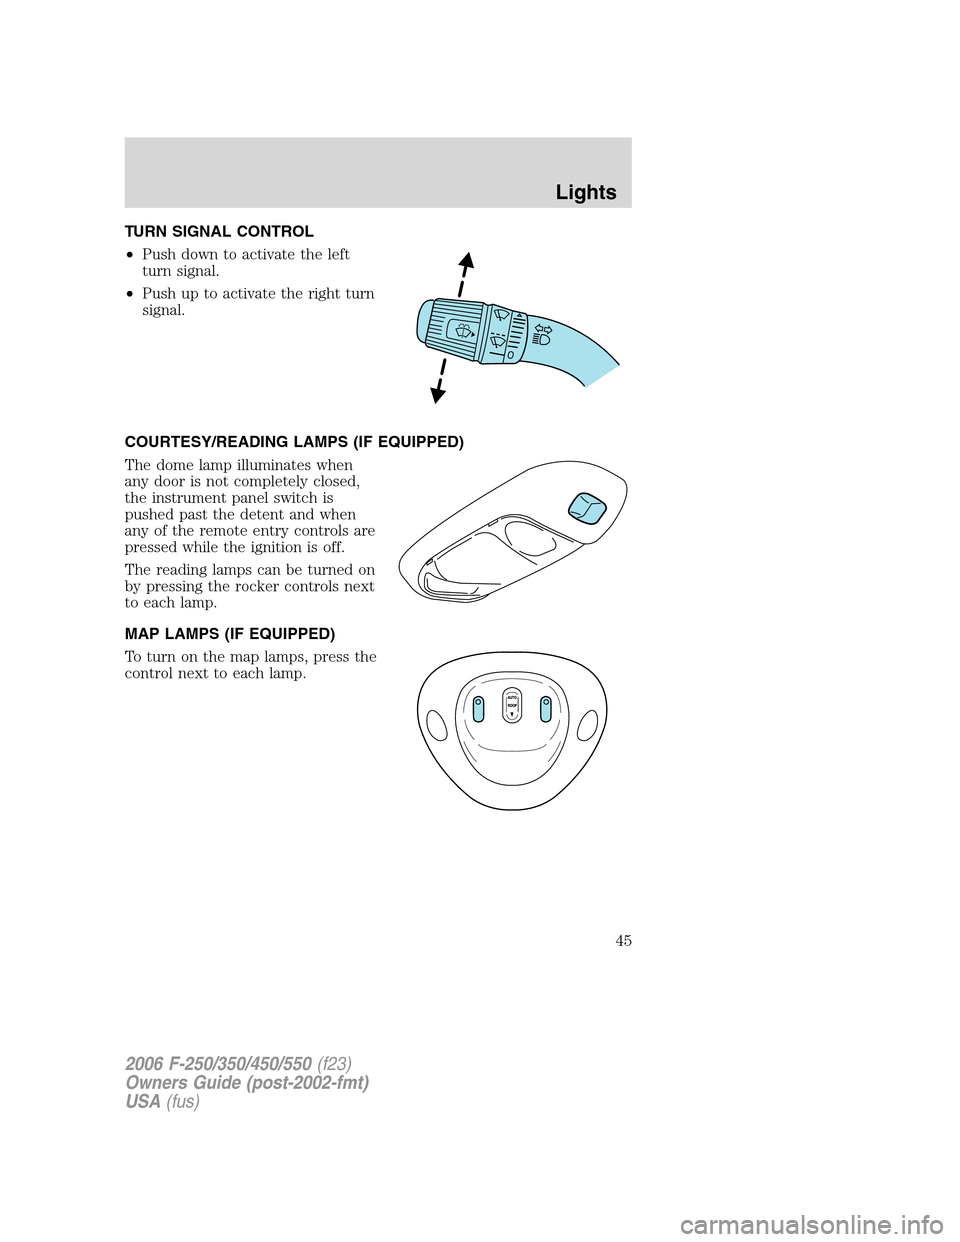 FORD SUPER DUTY 2006 1.G User Guide TURN SIGNAL CONTROL
•Push down to activate the left
turn signal.
•Push up to activate the right turn
signal.
COURTESY/READING LAMPS (IF EQUIPPED)
The dome lamp illuminates when
any door is not com